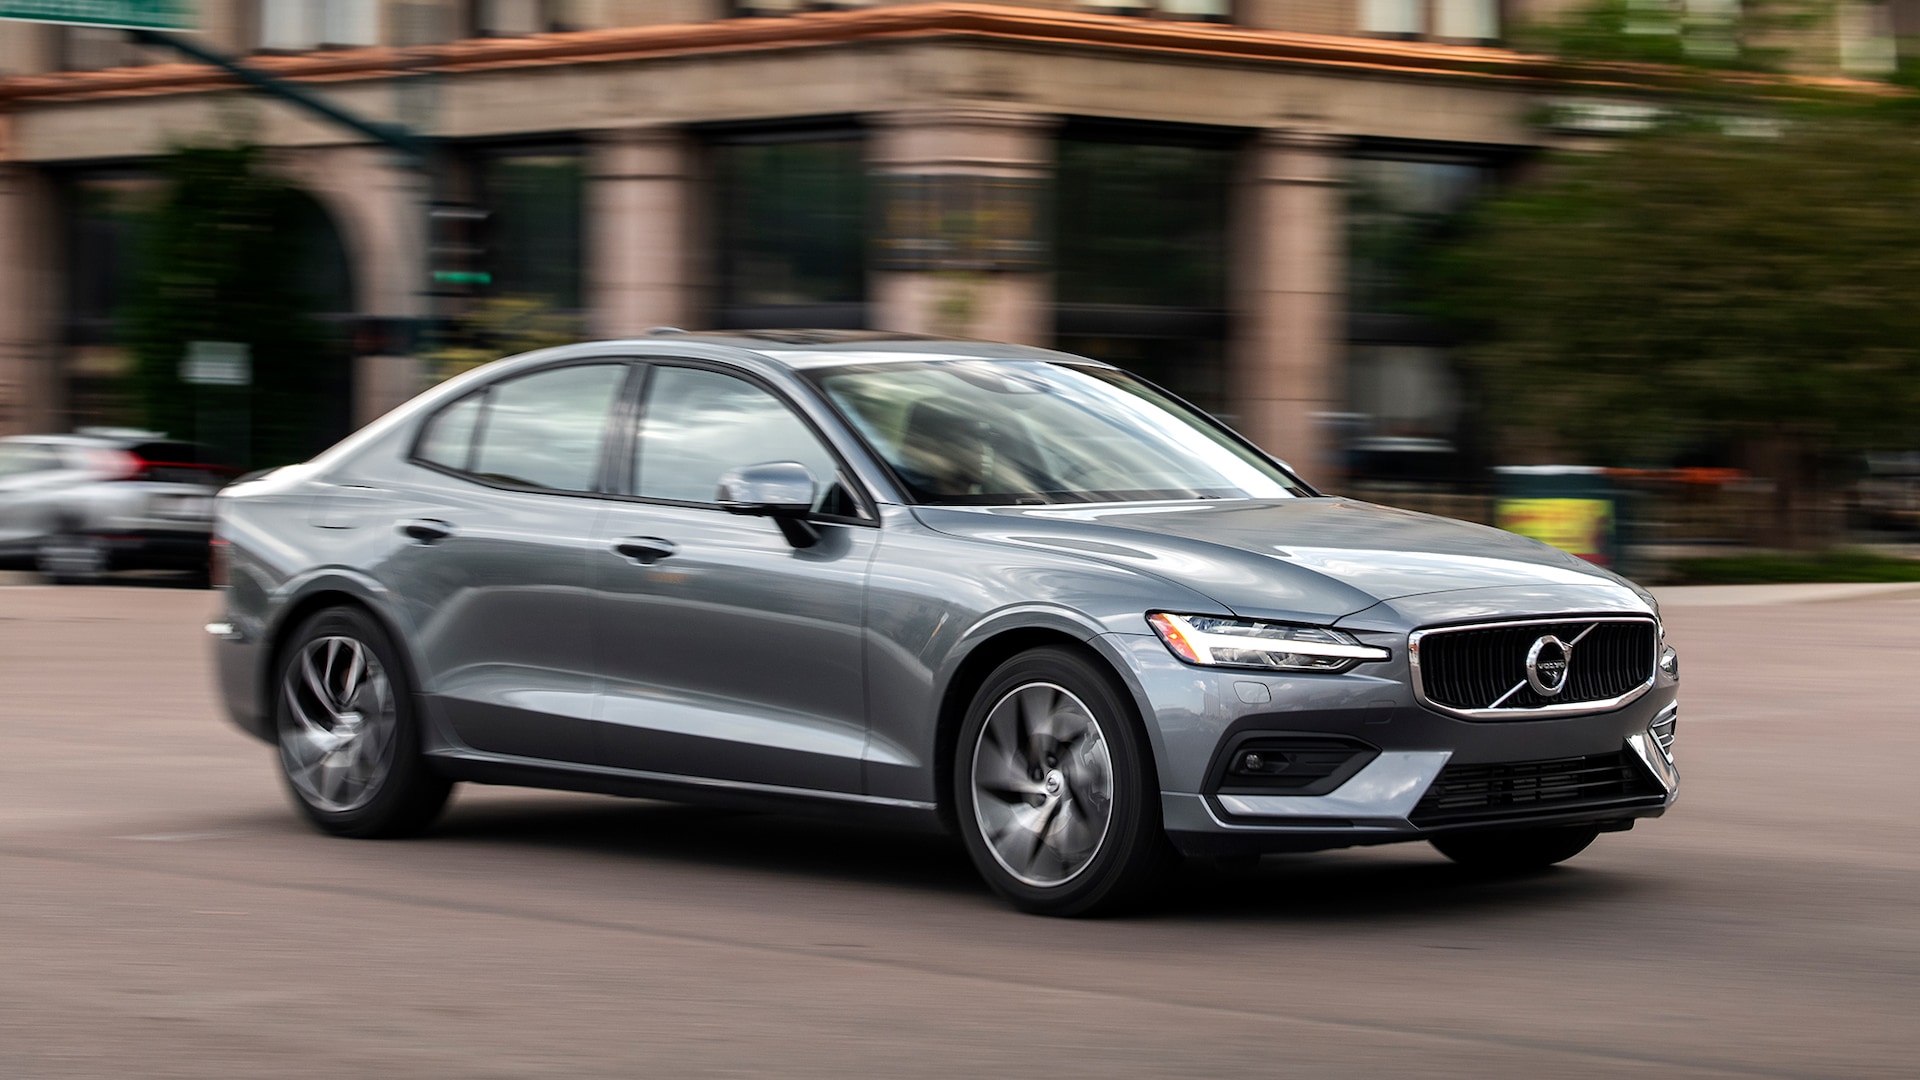 We Drove a 2019 Volvo S60 for a Year. Here's How It Did